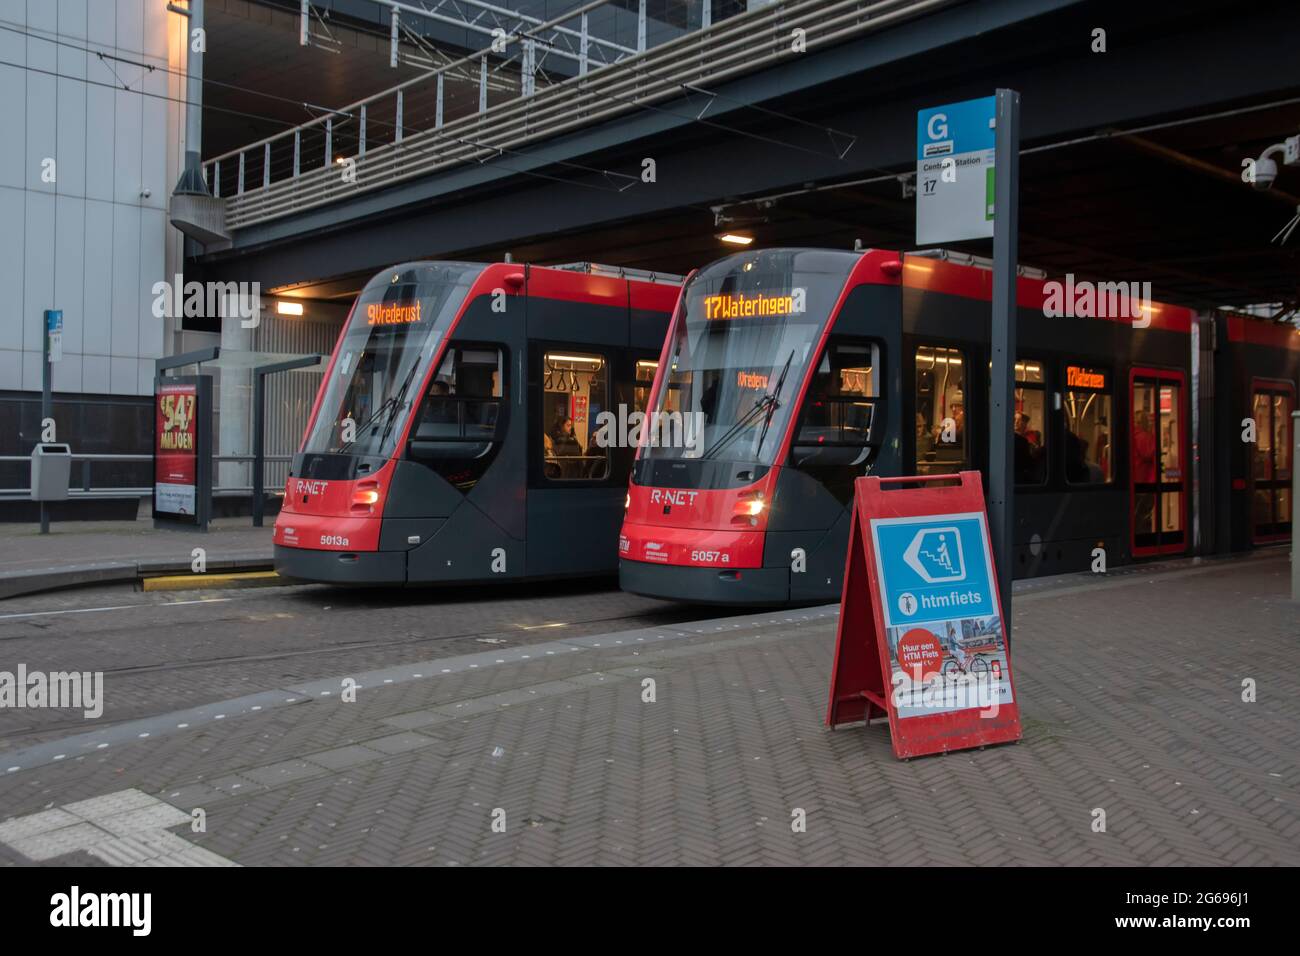 Tram 9 And 17 At The Central Train Station At The Hague The Netherlands 29-12-2019 Stock Photo